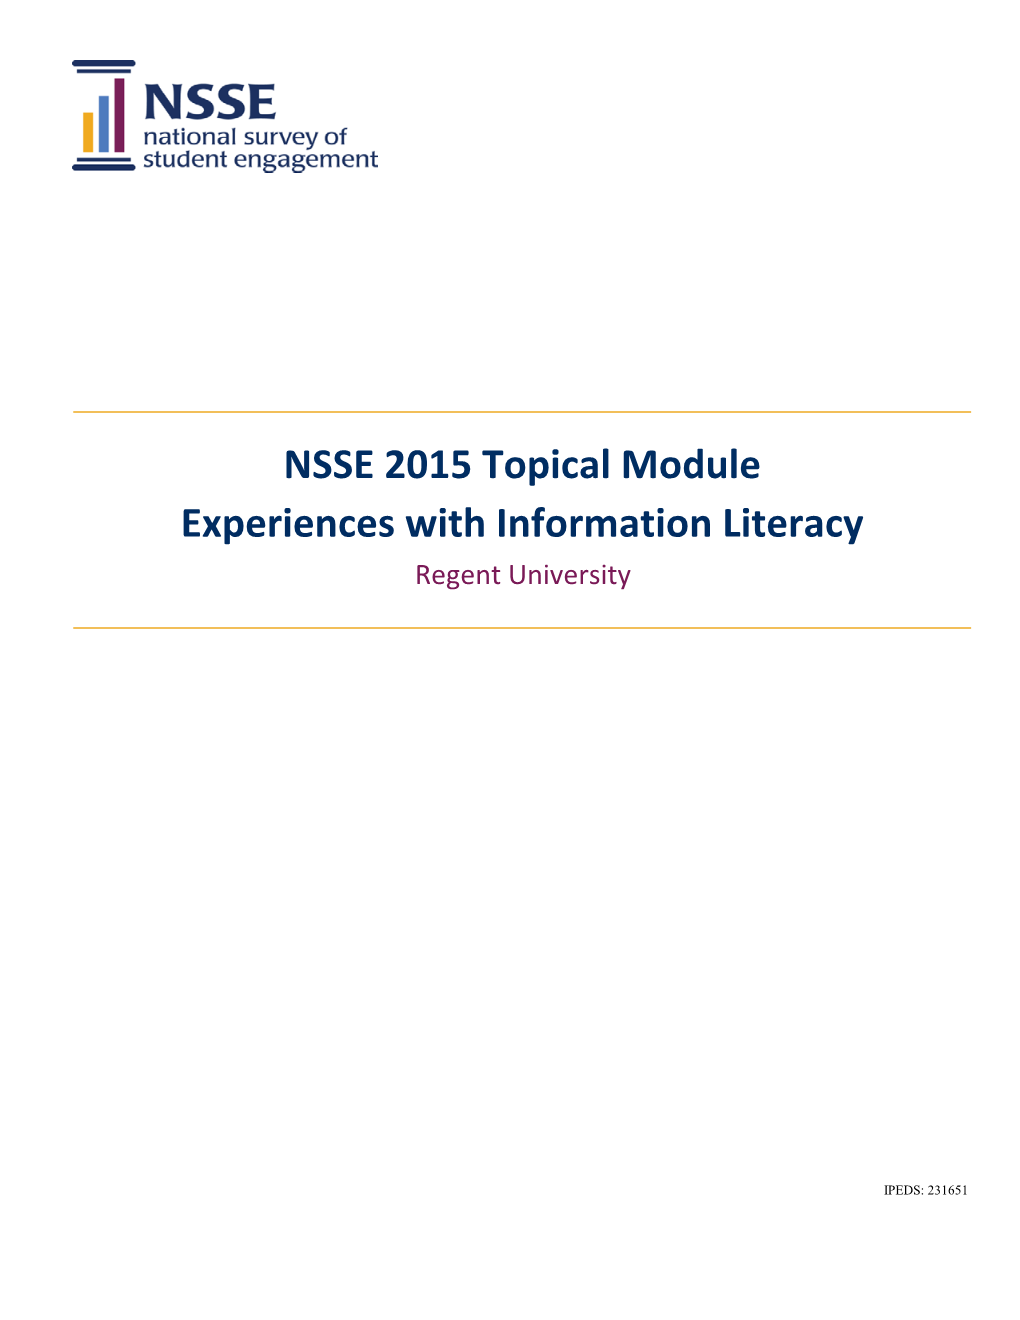 NSSE 2015 Topical Module Experiences with Information Literacy Regent University